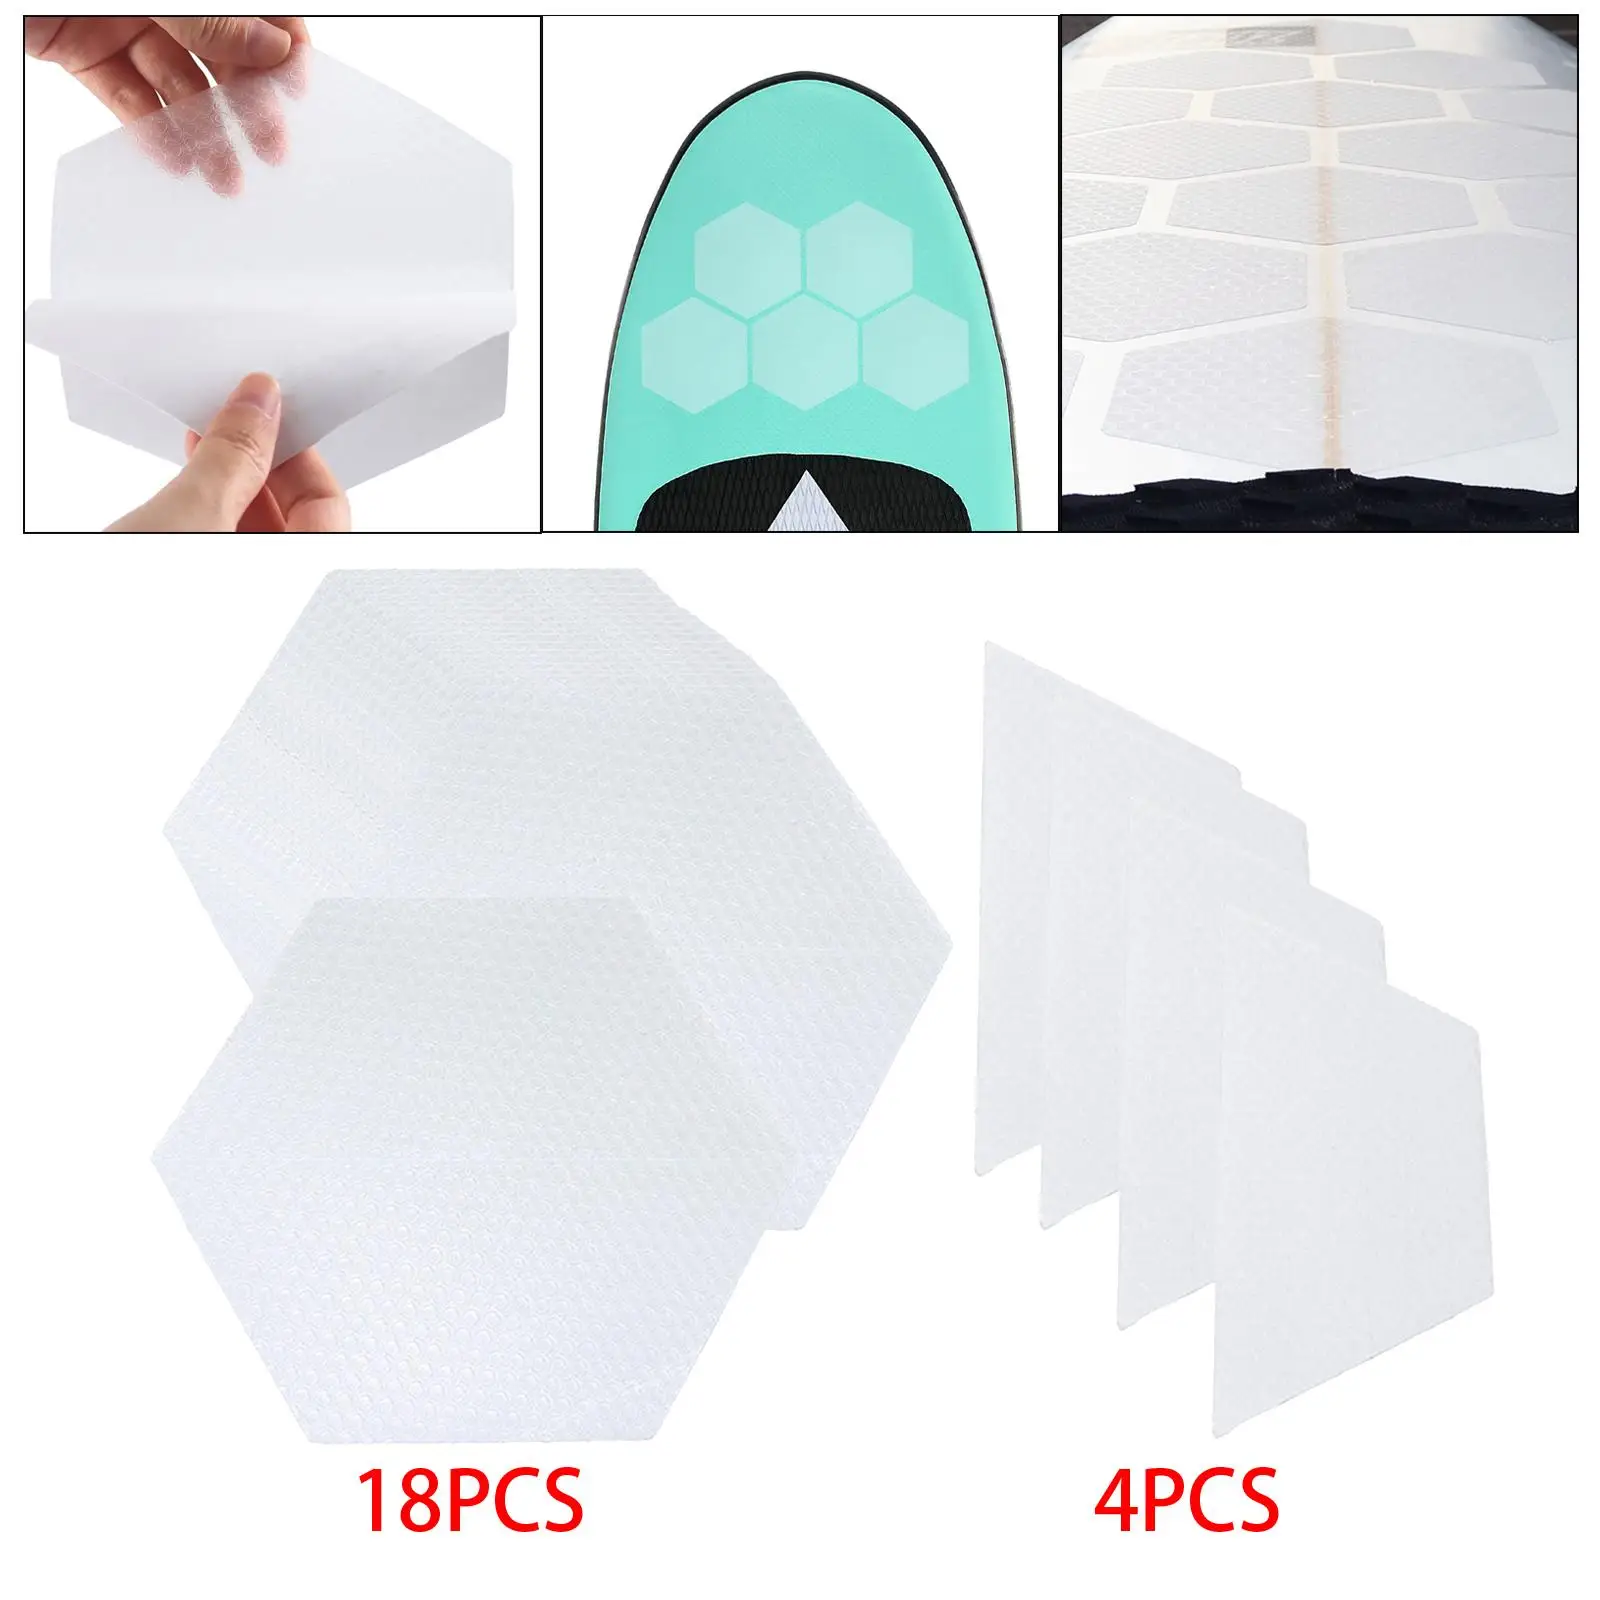 Hexagon Surfboard Traction Pads  Comb Holes Foot Strap Surf    Pads for Paddle Board Surfing Accessories